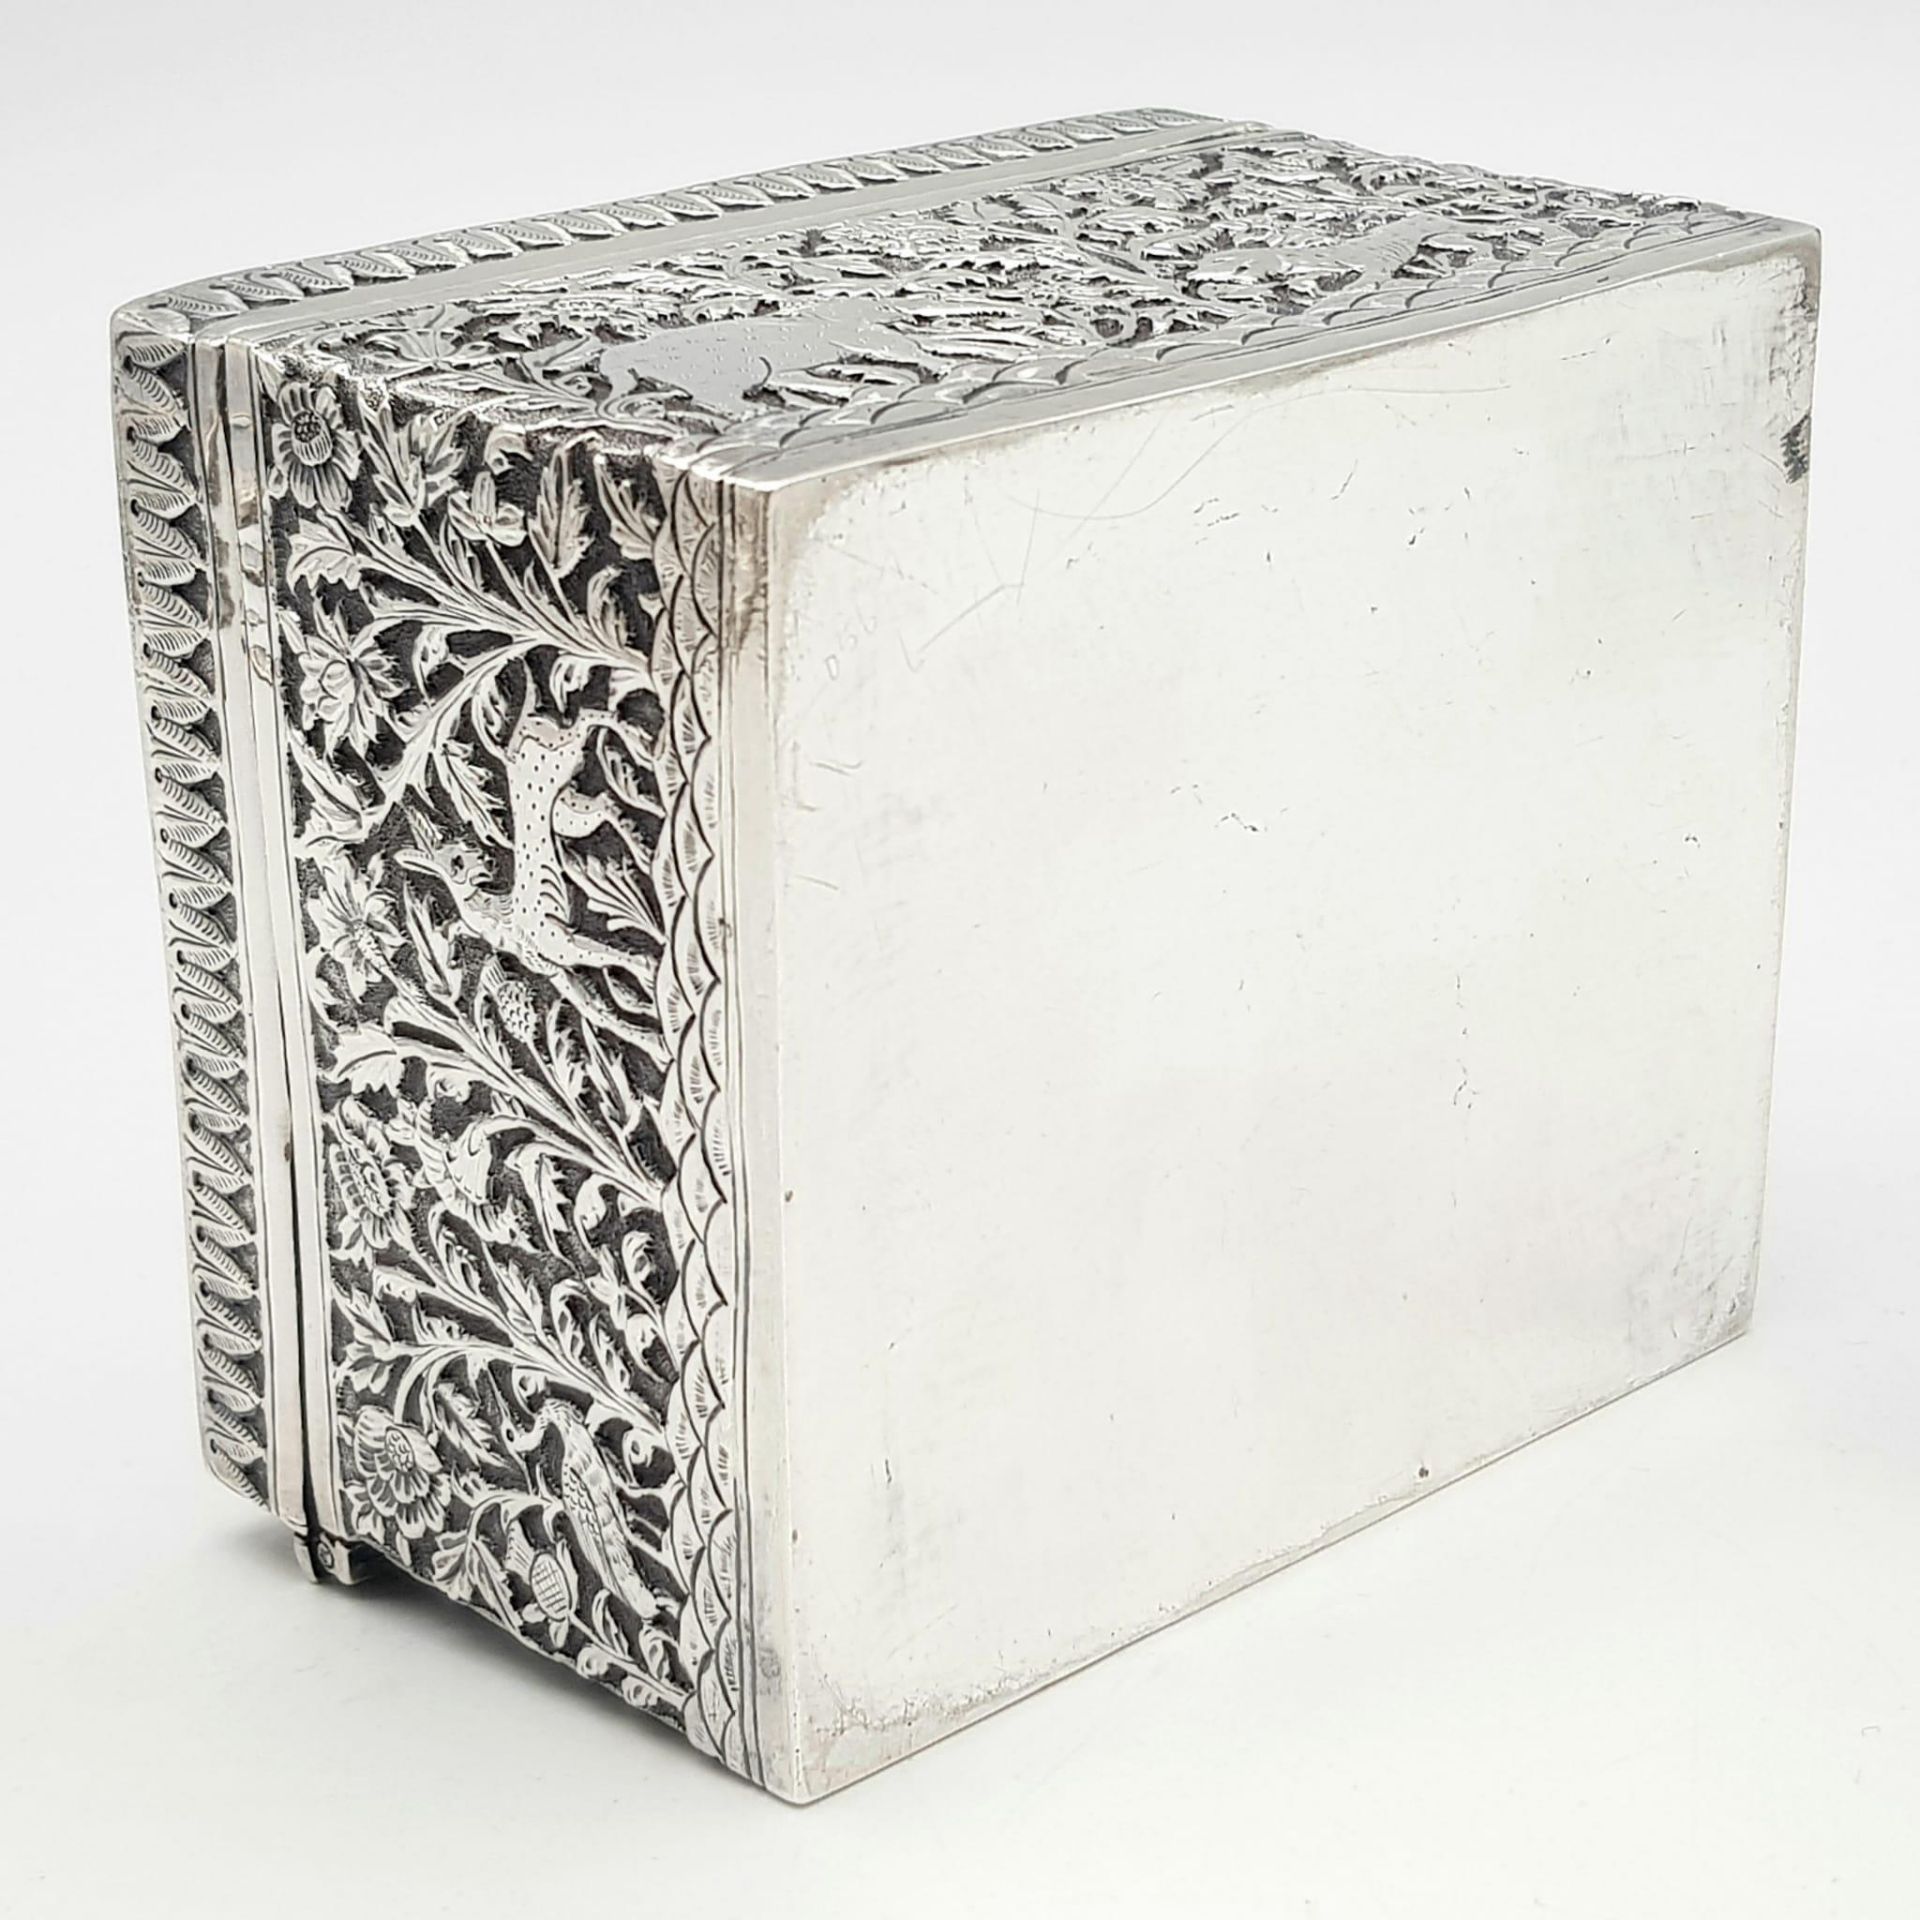 A SOLID SILVER HINGED TRINKET BOX HAND ENGRAVED WITH AN AFRICAN THEME, IN VERY GOOD CONDITION AND - Image 14 of 15